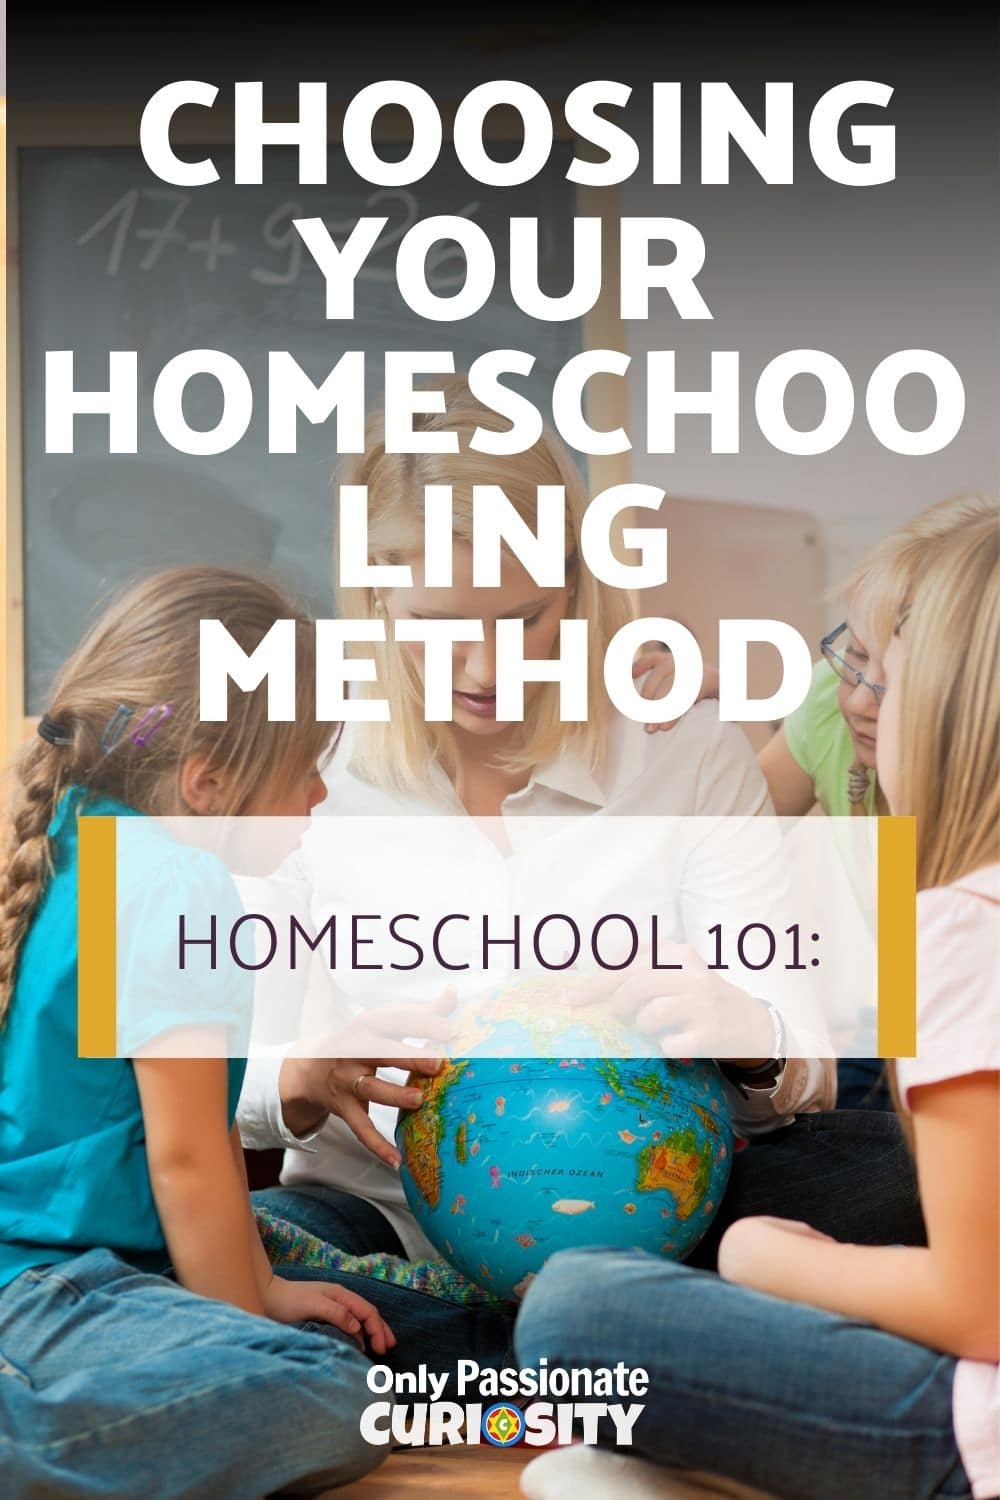 There are lots of homeschooling methods available, and it can be hard to choose! These simple descriptions may help you narrow down your options and choose the one that's right for your family.